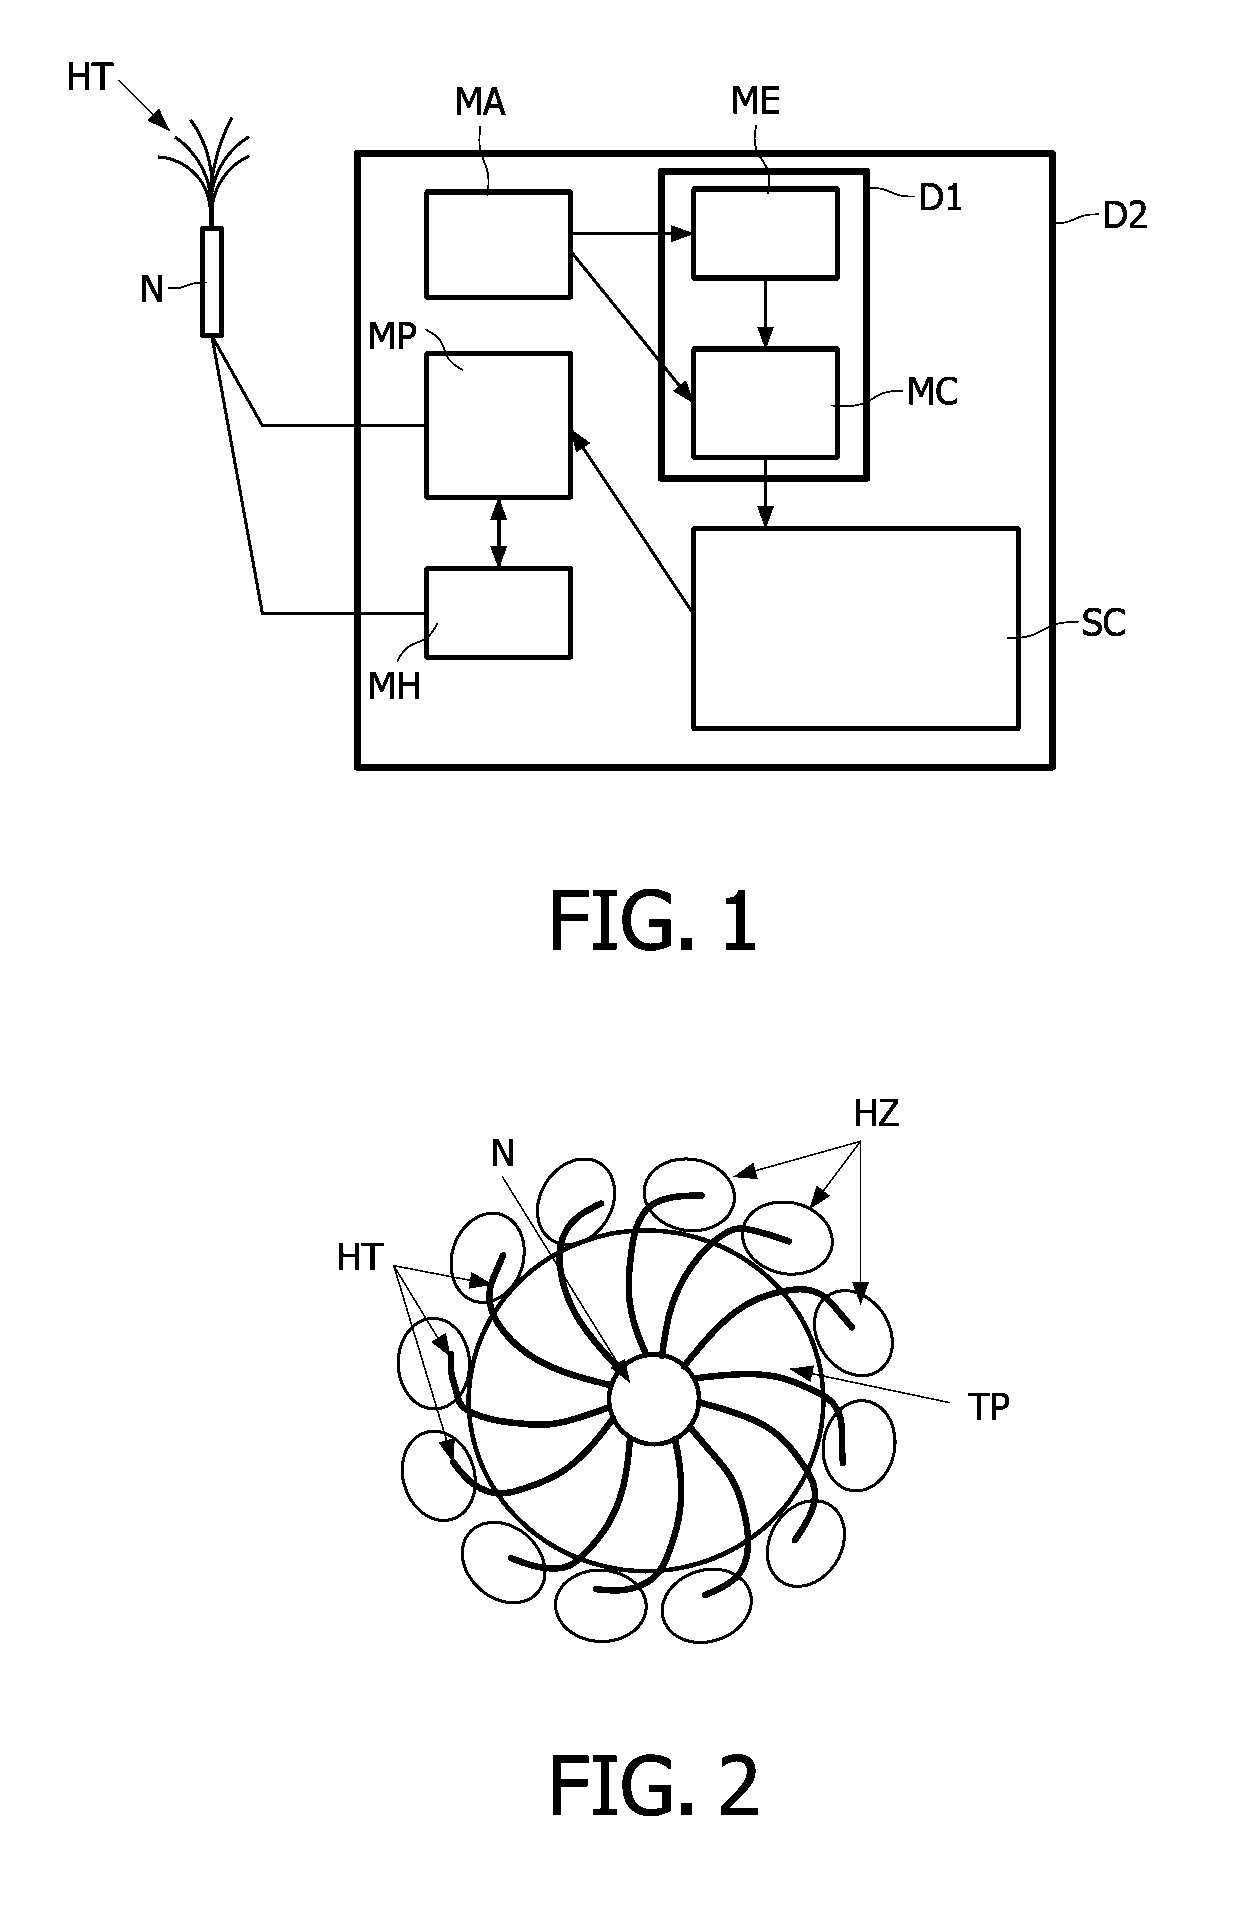 Method and device for producing images of heating tines near a tissue part